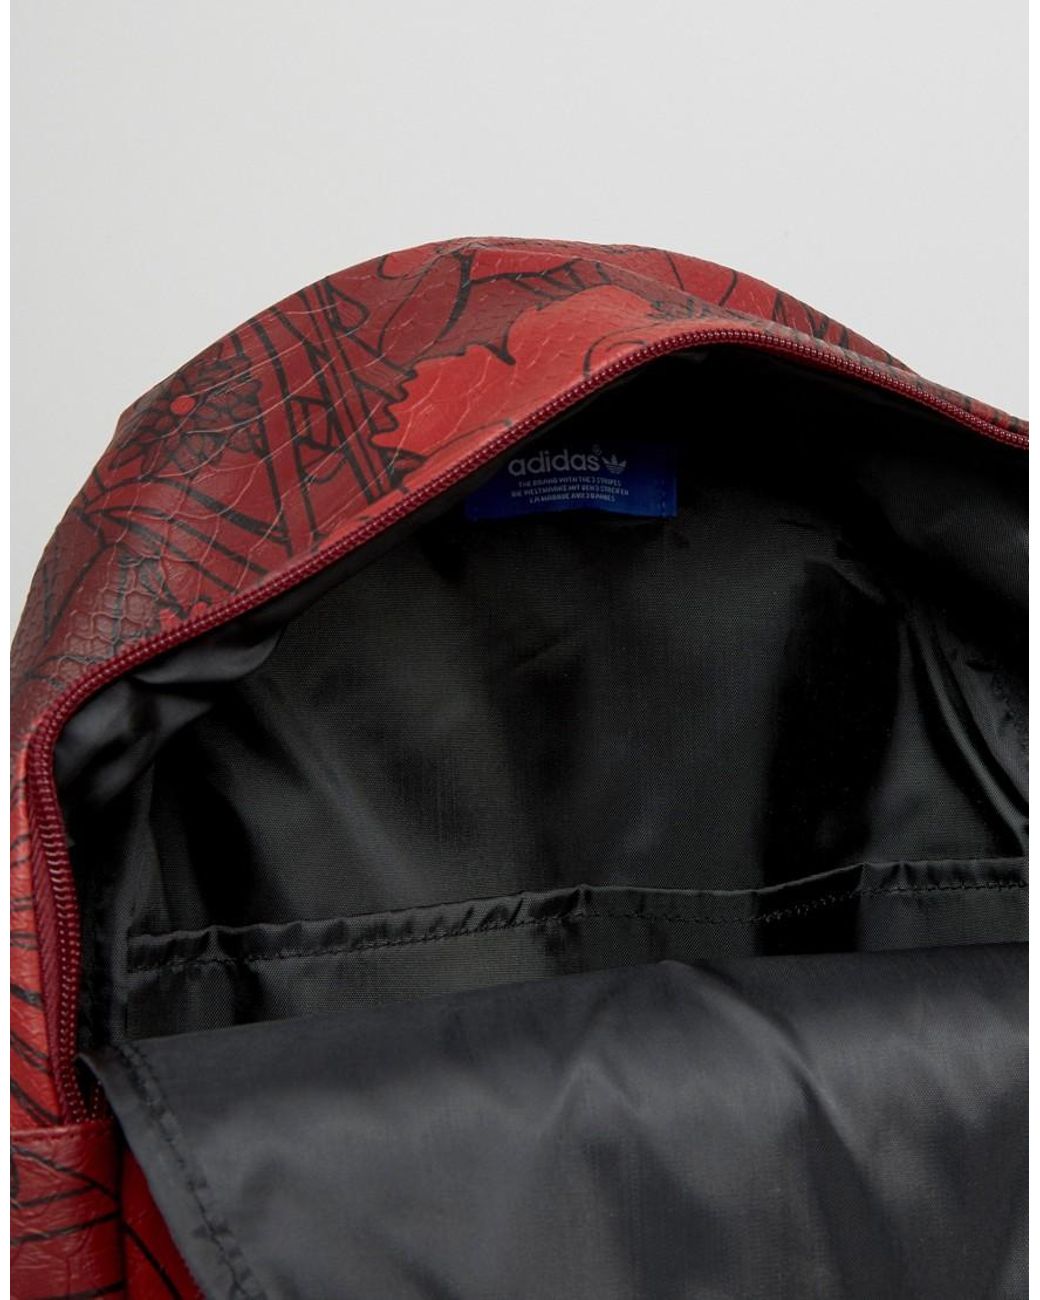 adidas Originals Leather Originals Floral Print Backpack With Trefoil Logo  in Red | Lyst